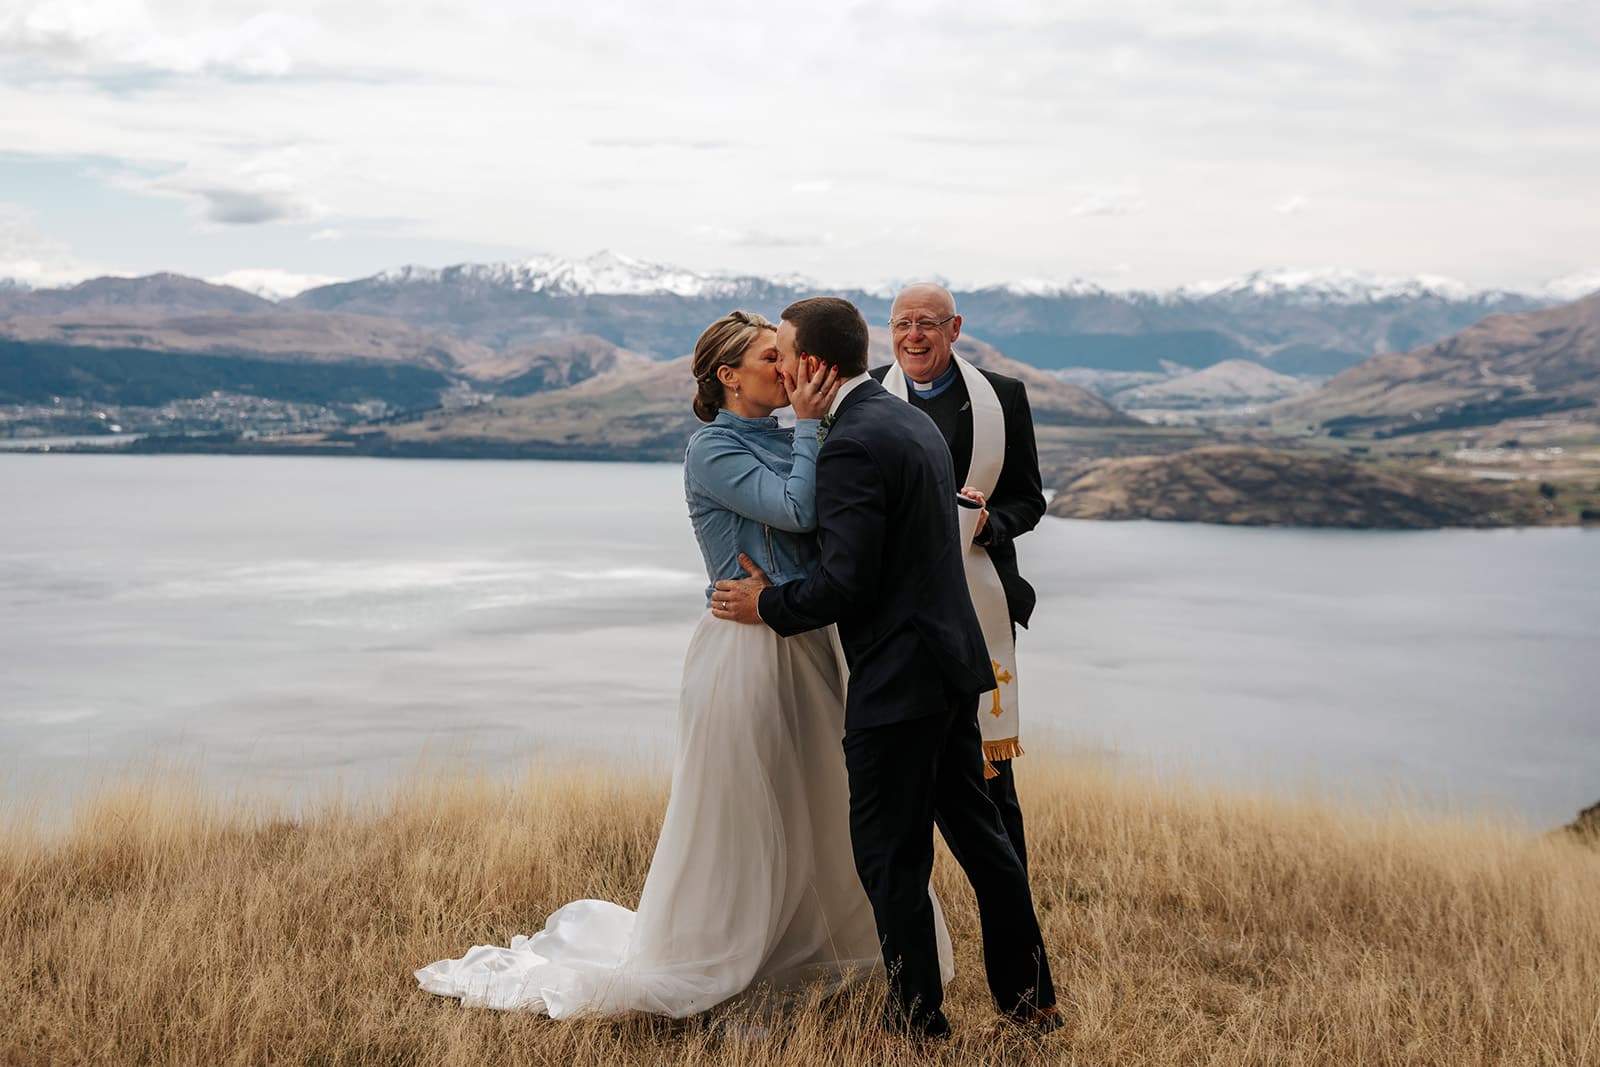 Queenstown Helicopter elopement on Bayonet Peak with a pastor